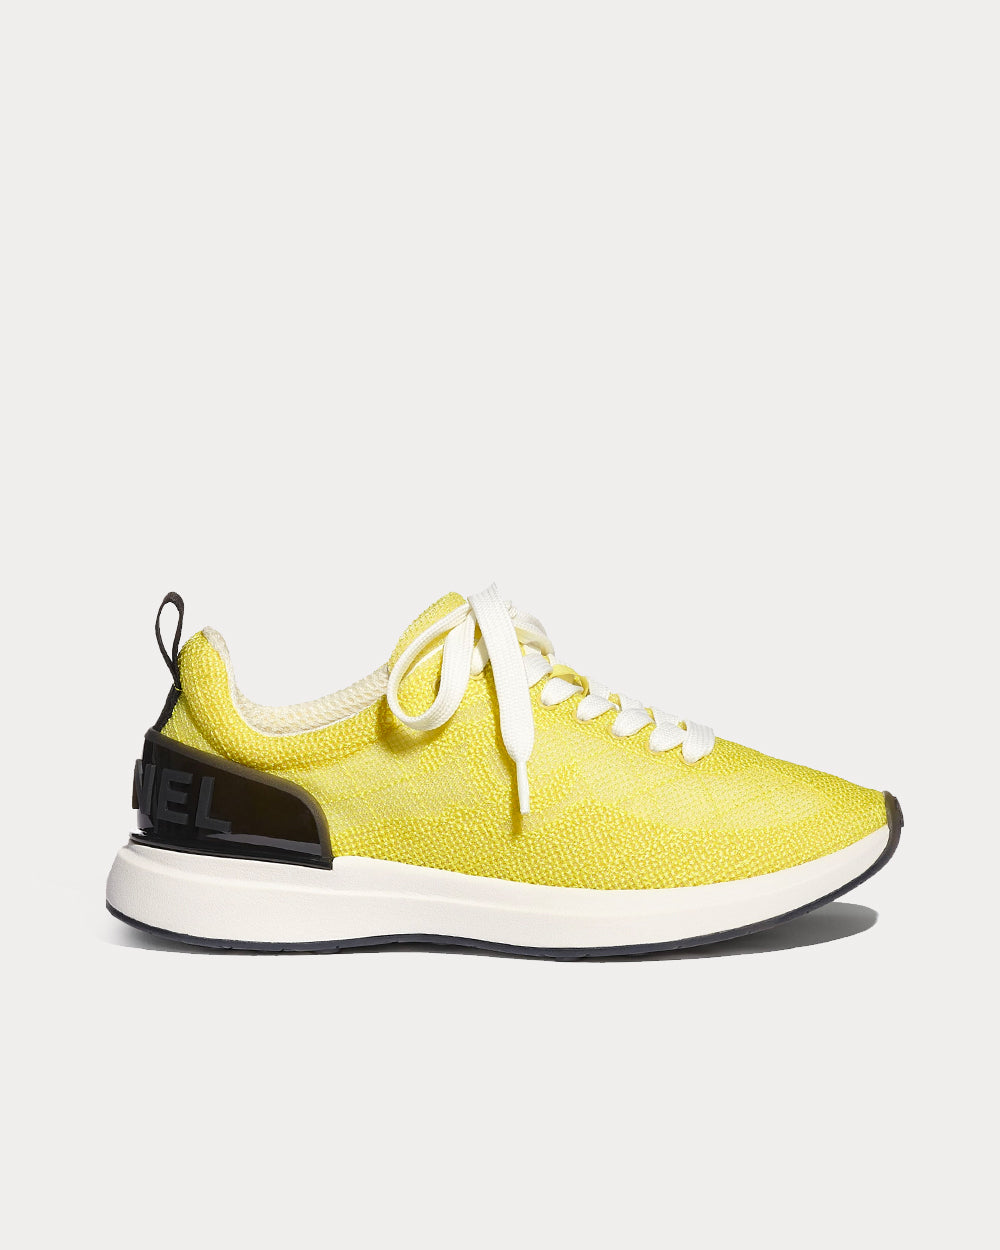 Chanel Embroidered Mesh Yellow Low Top Sneakers - in